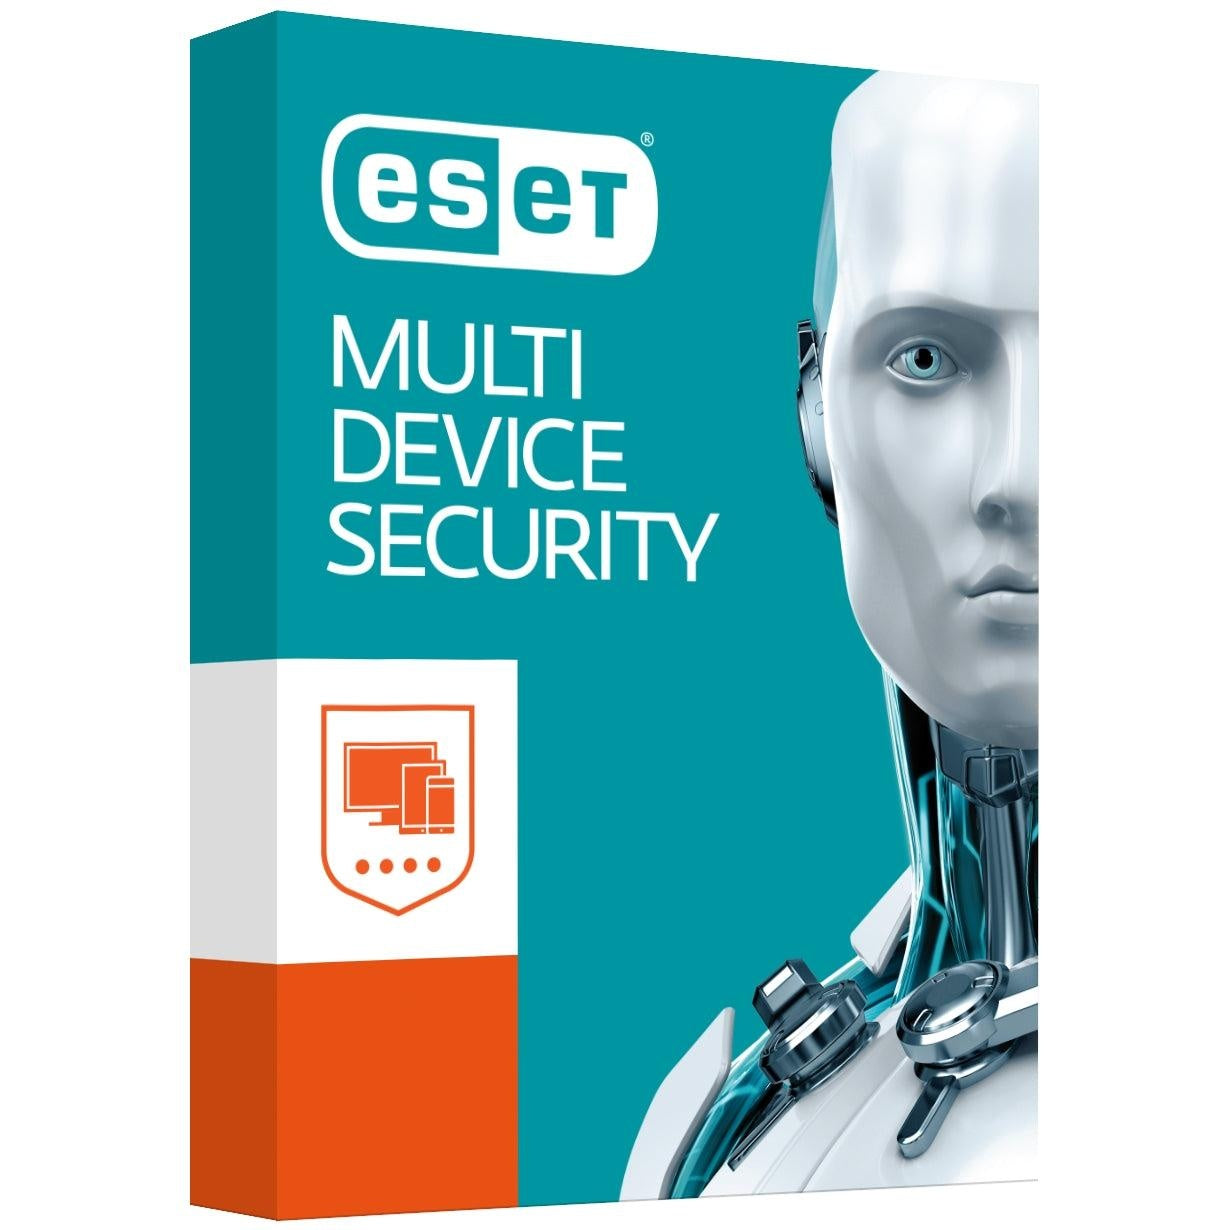 ESET Multi Device Security (Advanced Protection) 5 Windows PCs or Macs or Linux + 5 Android Devices 1 Year - Includes 1x Physical Printed Download ESET